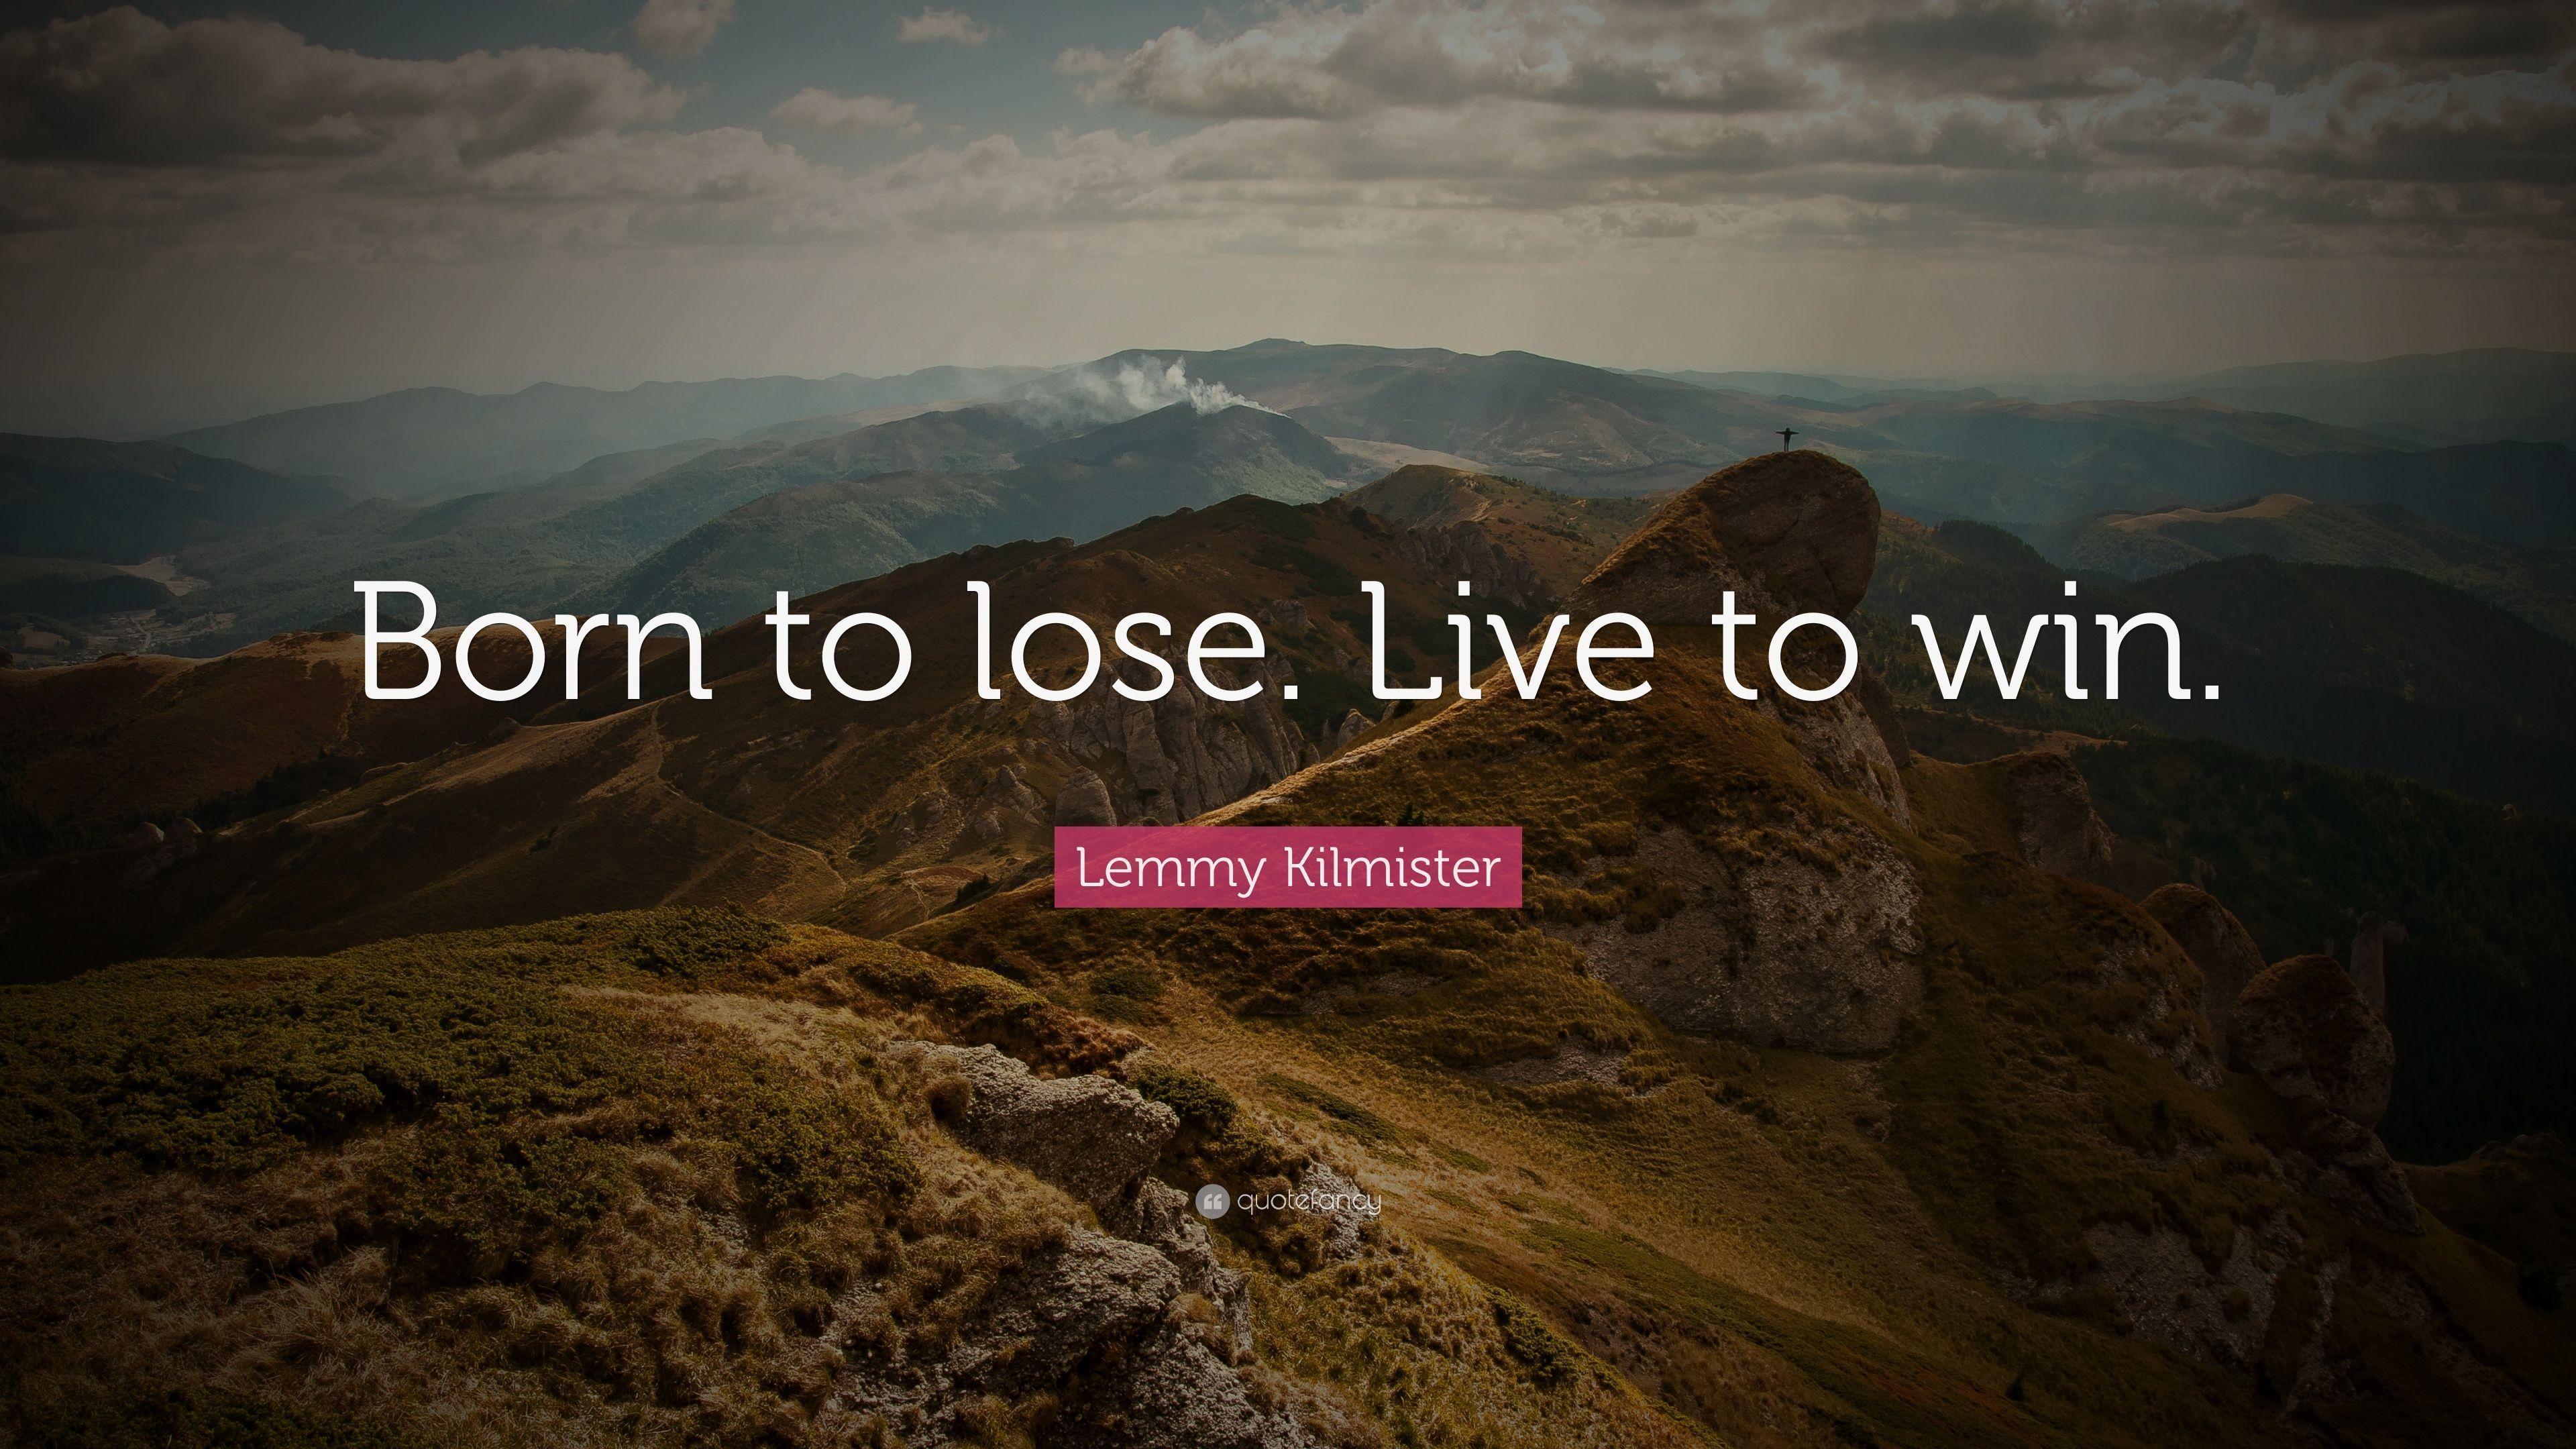 Lemmy Kilmister Quote: “Born to lose. Live to win.” 12 wallpaper